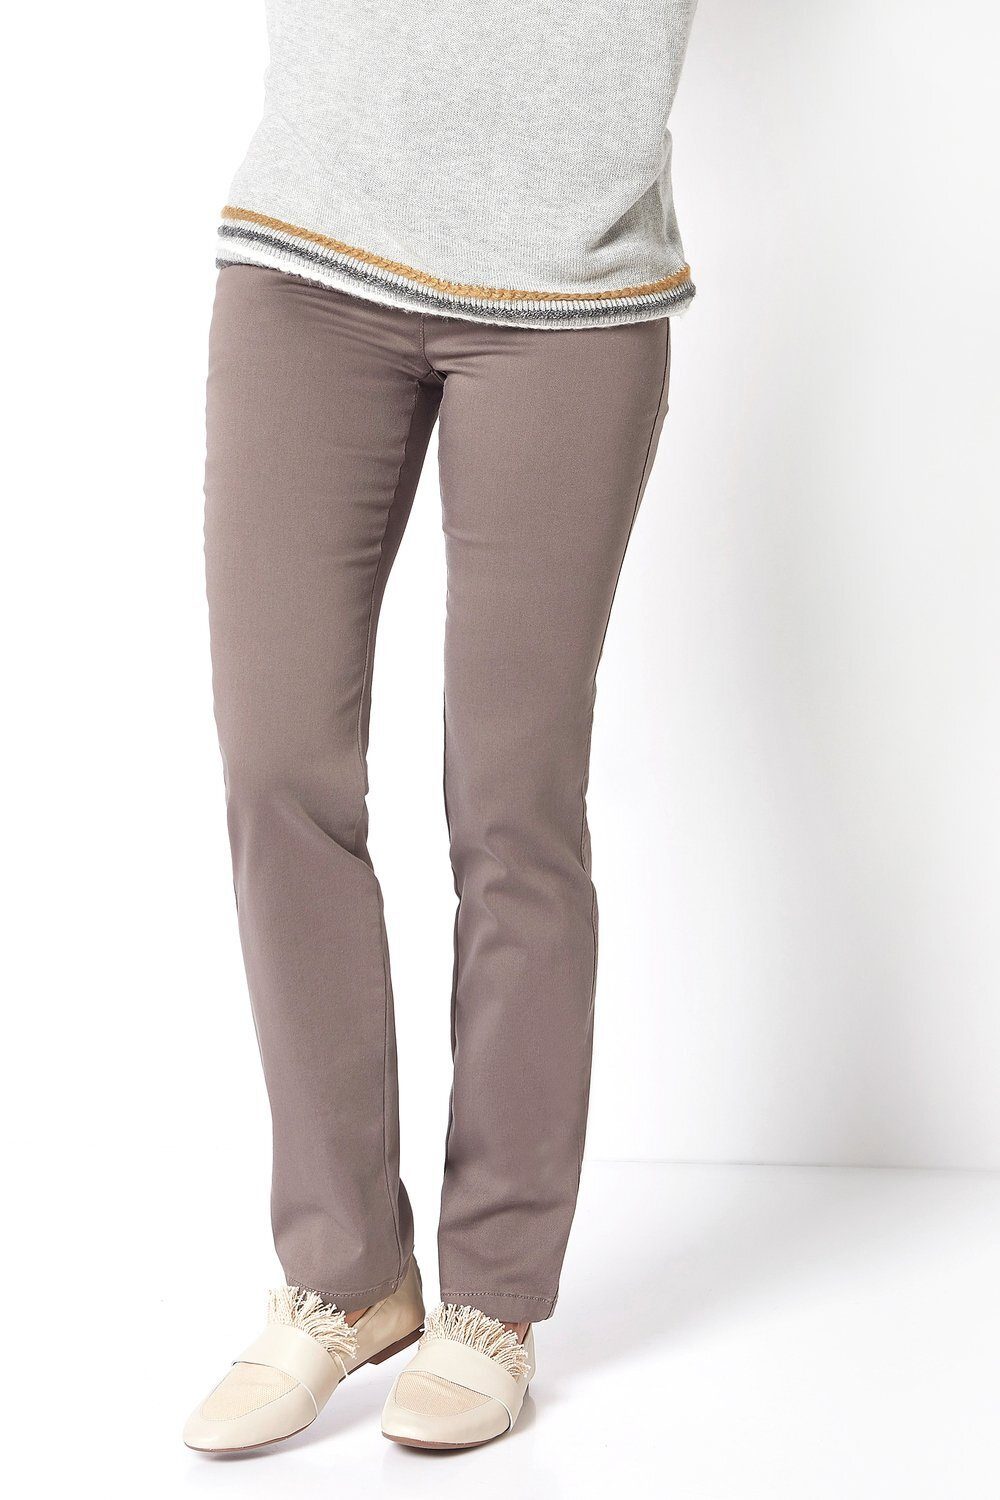 Relaxed by TONI 5-Pocket-Hose Meine beste Freundin in schmaler Passform taupe - 075